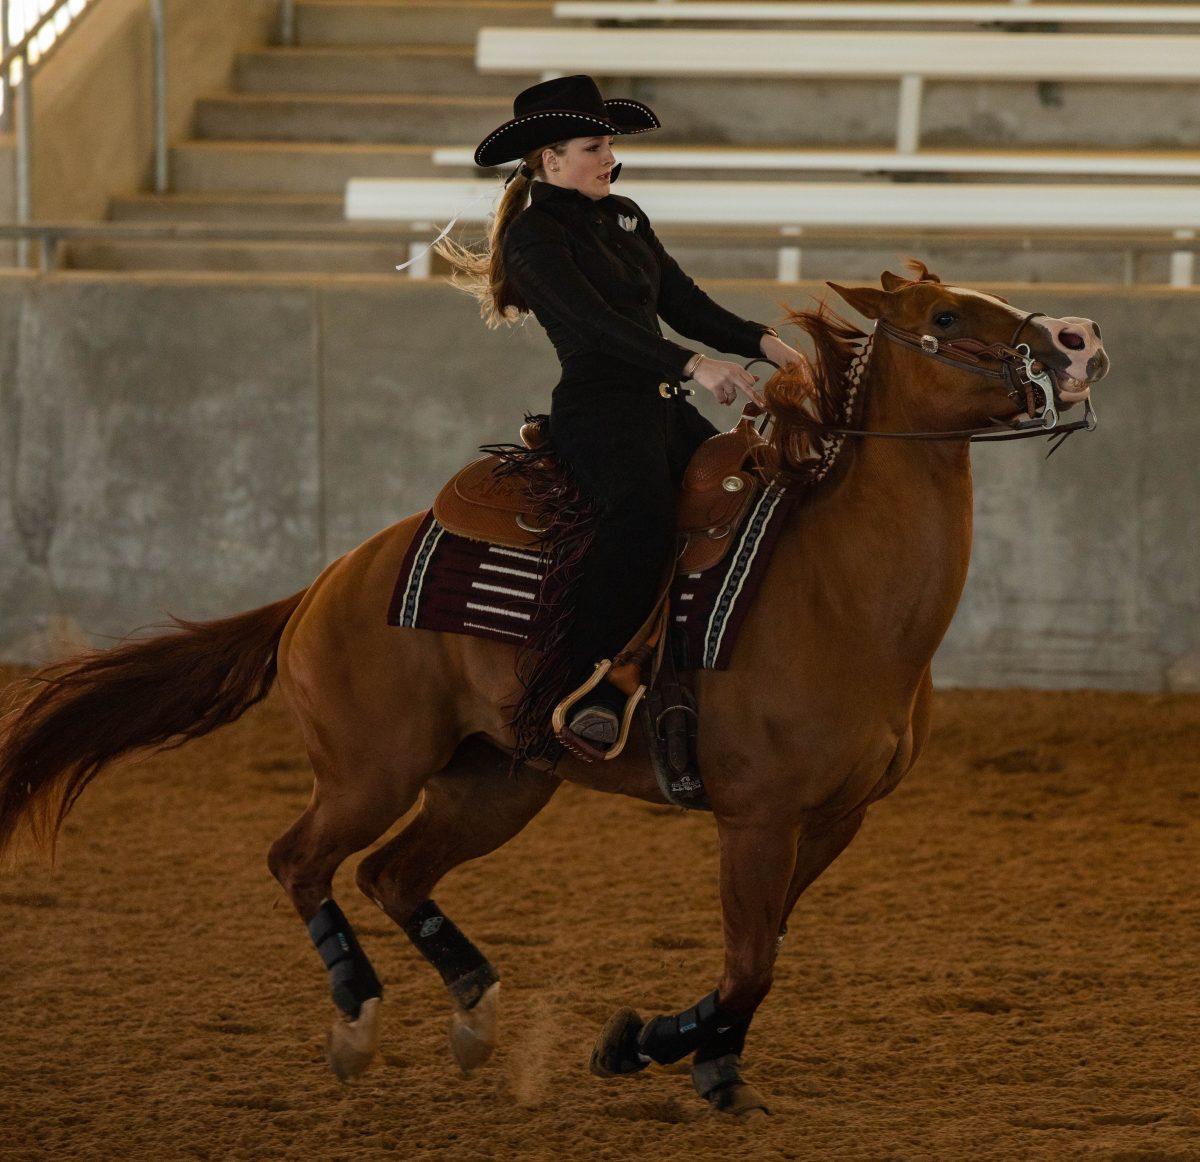 Sophomore Lauren Hanson rides A&Ms Indie in the reining event during the competition against Auburn at Hildebrand Equine Complex on Saturday, Feb. 4, 2023.